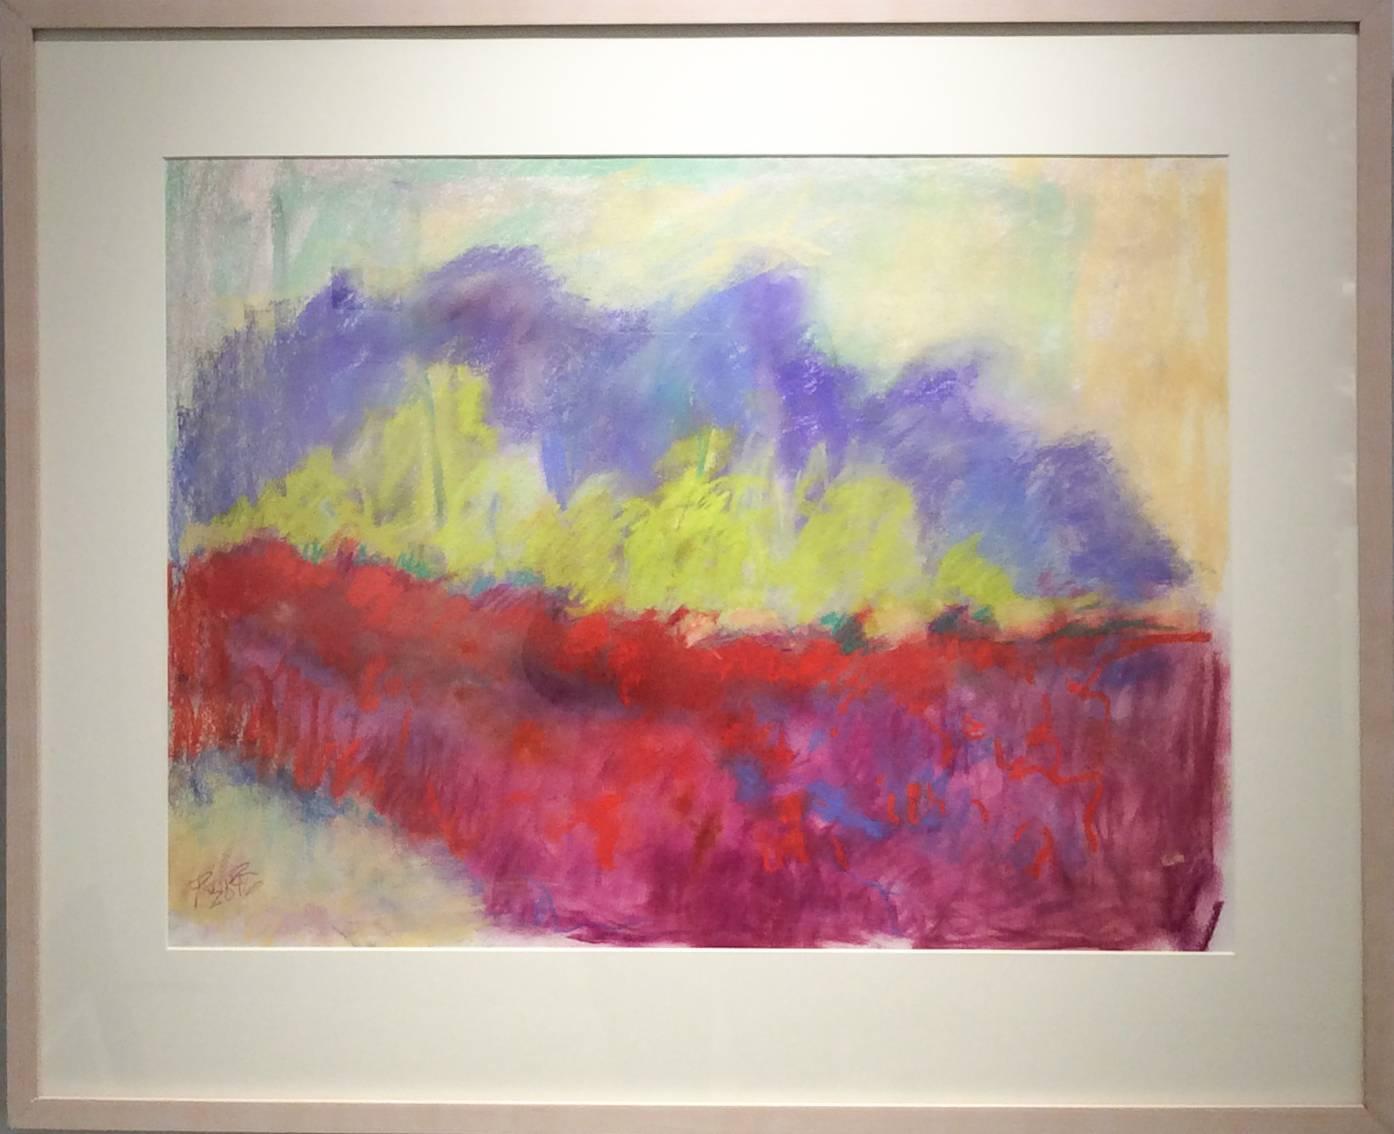 Red Clover Field (Ethereal Abstracted Landscape Pastel on Paper) - Art by Nancy Rutter